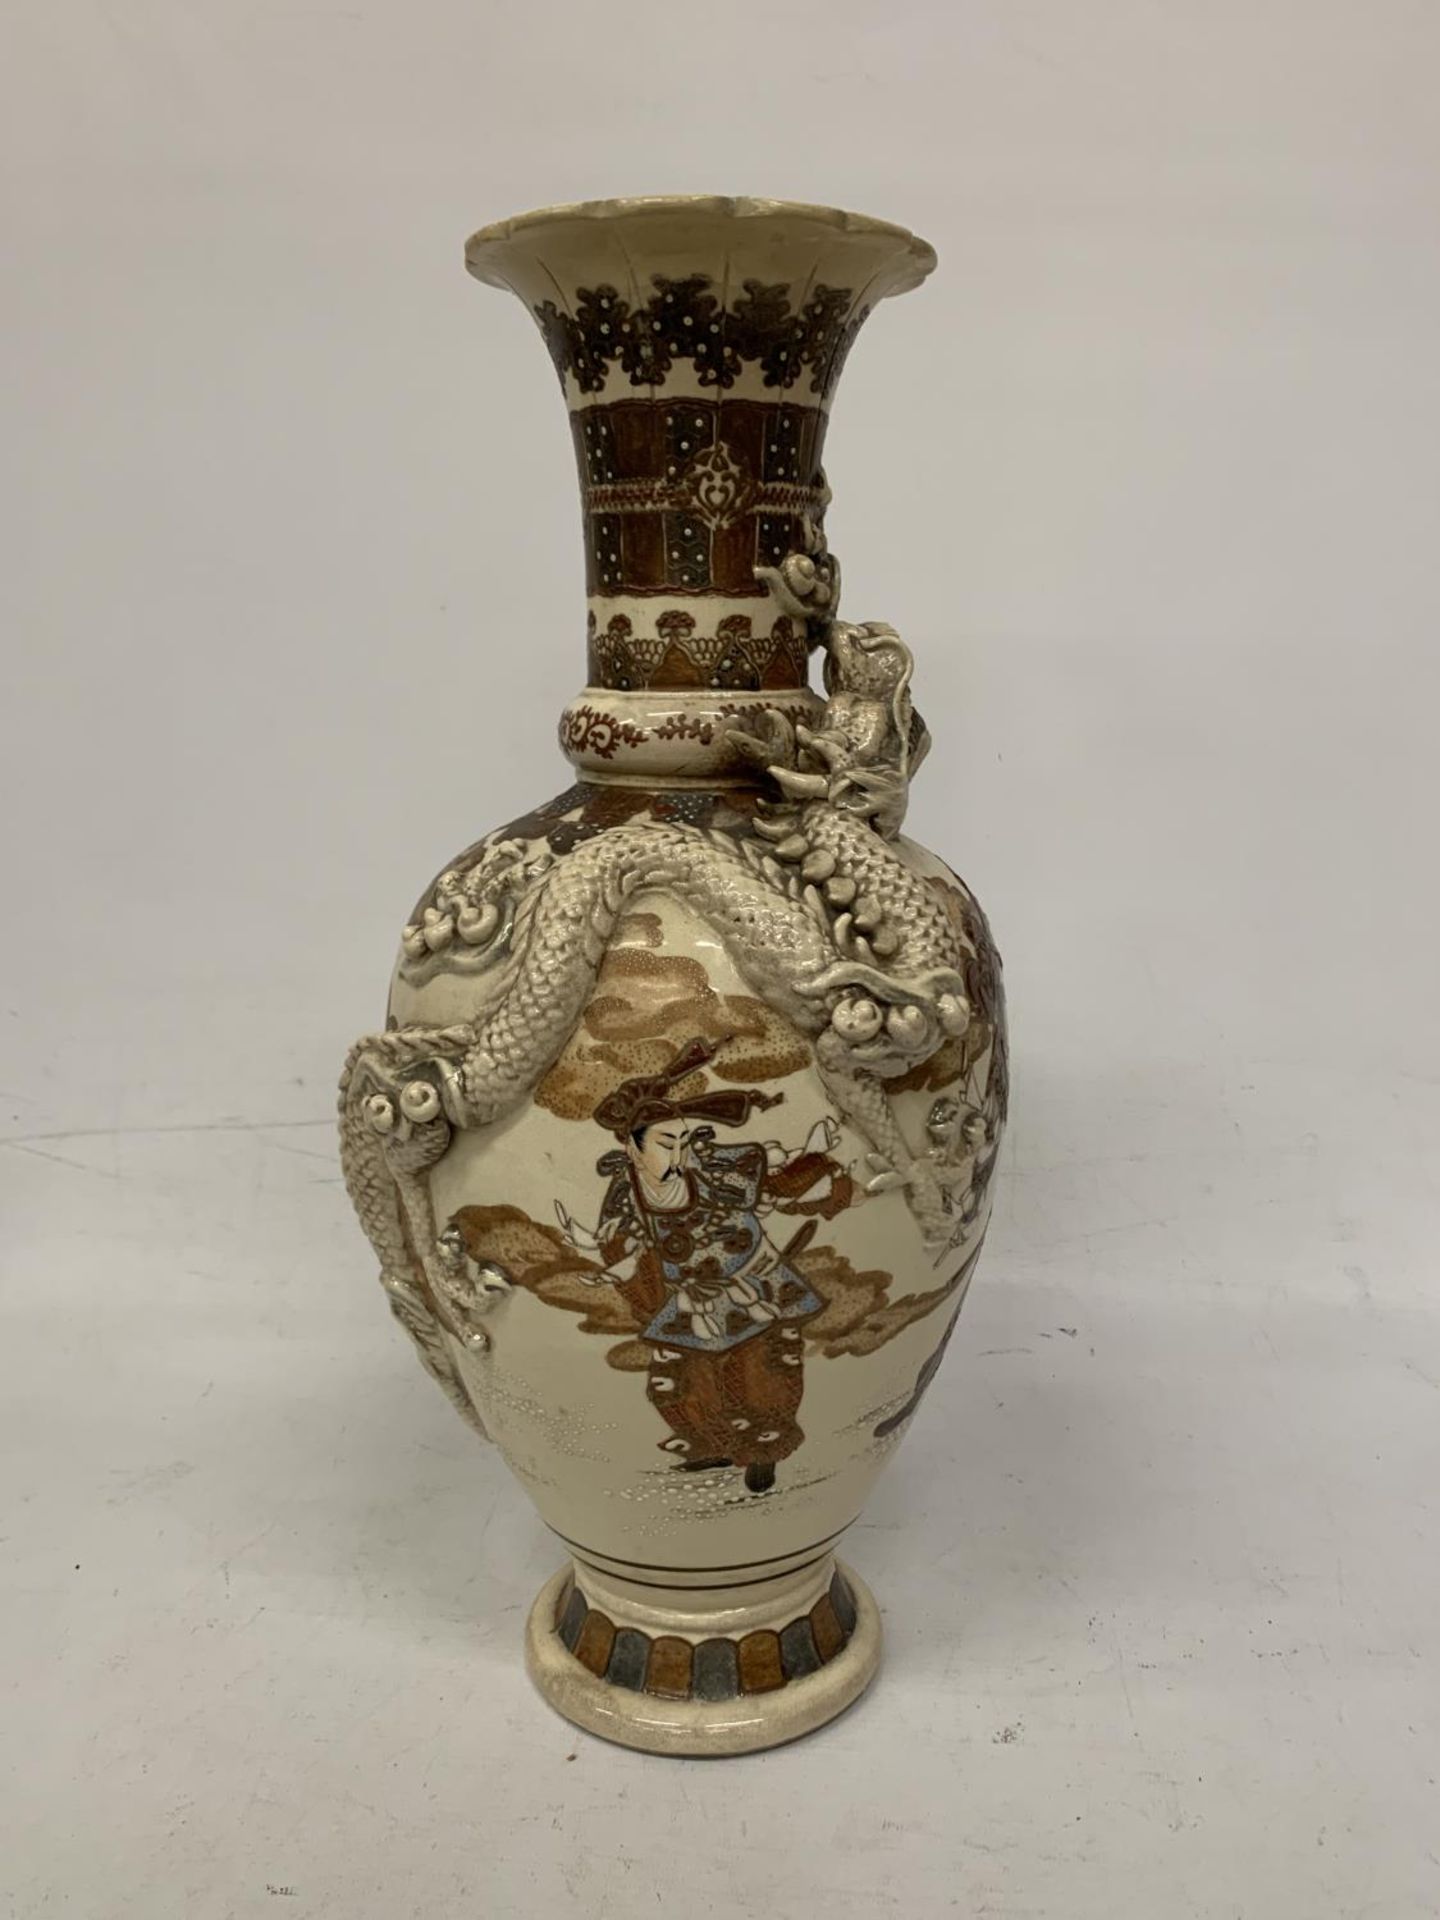 A LARGE 19TH CENTURY JAPANESE SATSUMA VASE DECORATED WITH SAMURAI WARRIORS AND DRAGON DETAIL - - Image 2 of 4